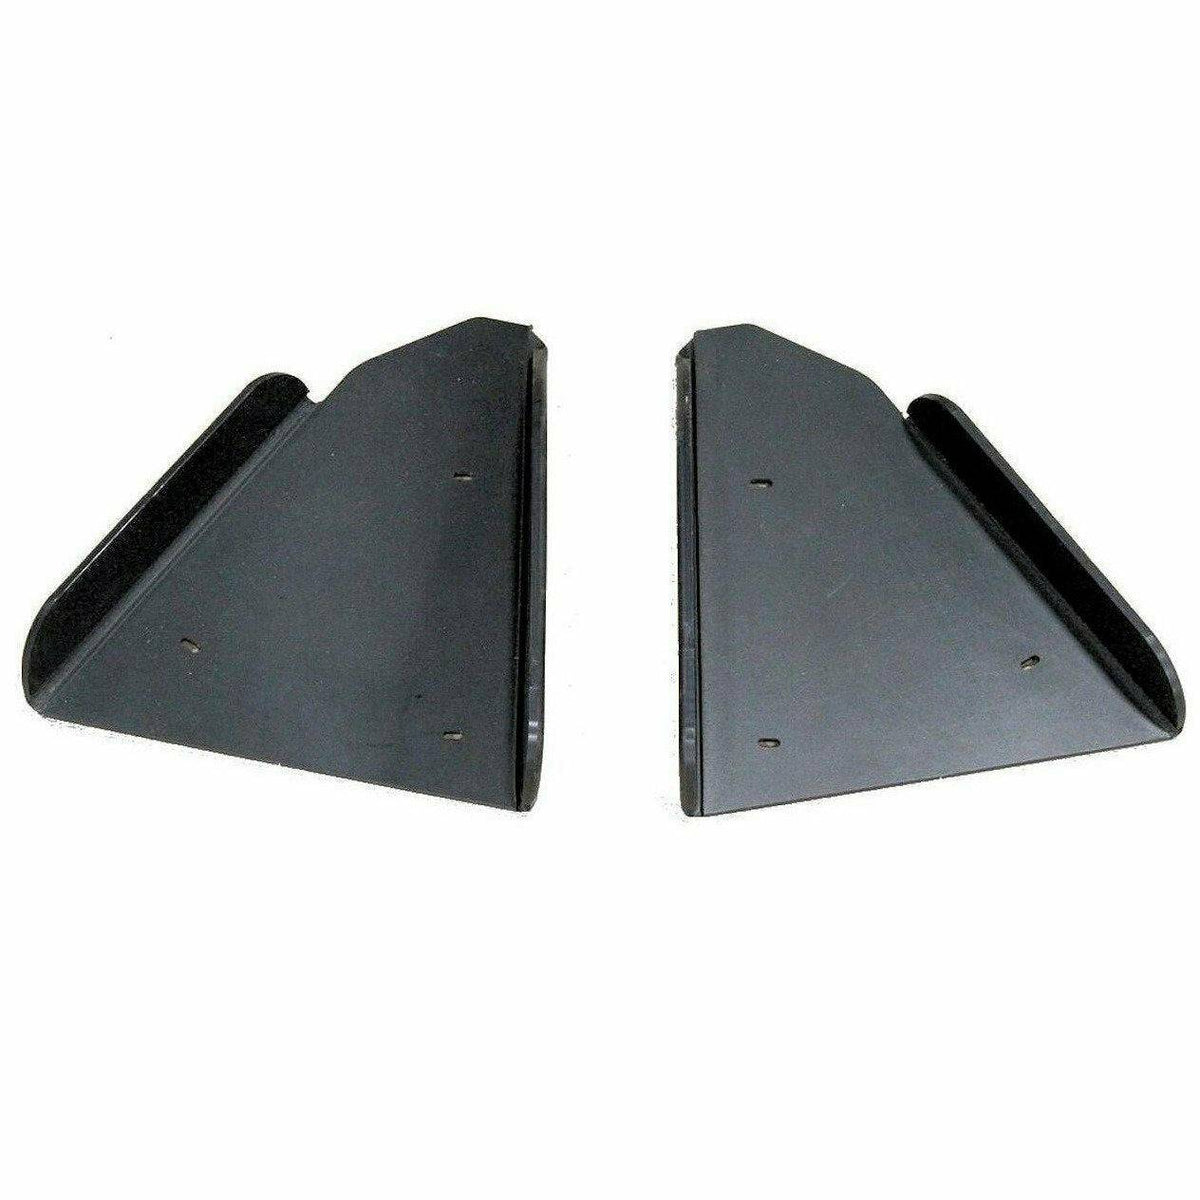 SSS Off-Road UHMW Arm Guards for Honda Pioneer 1000-5